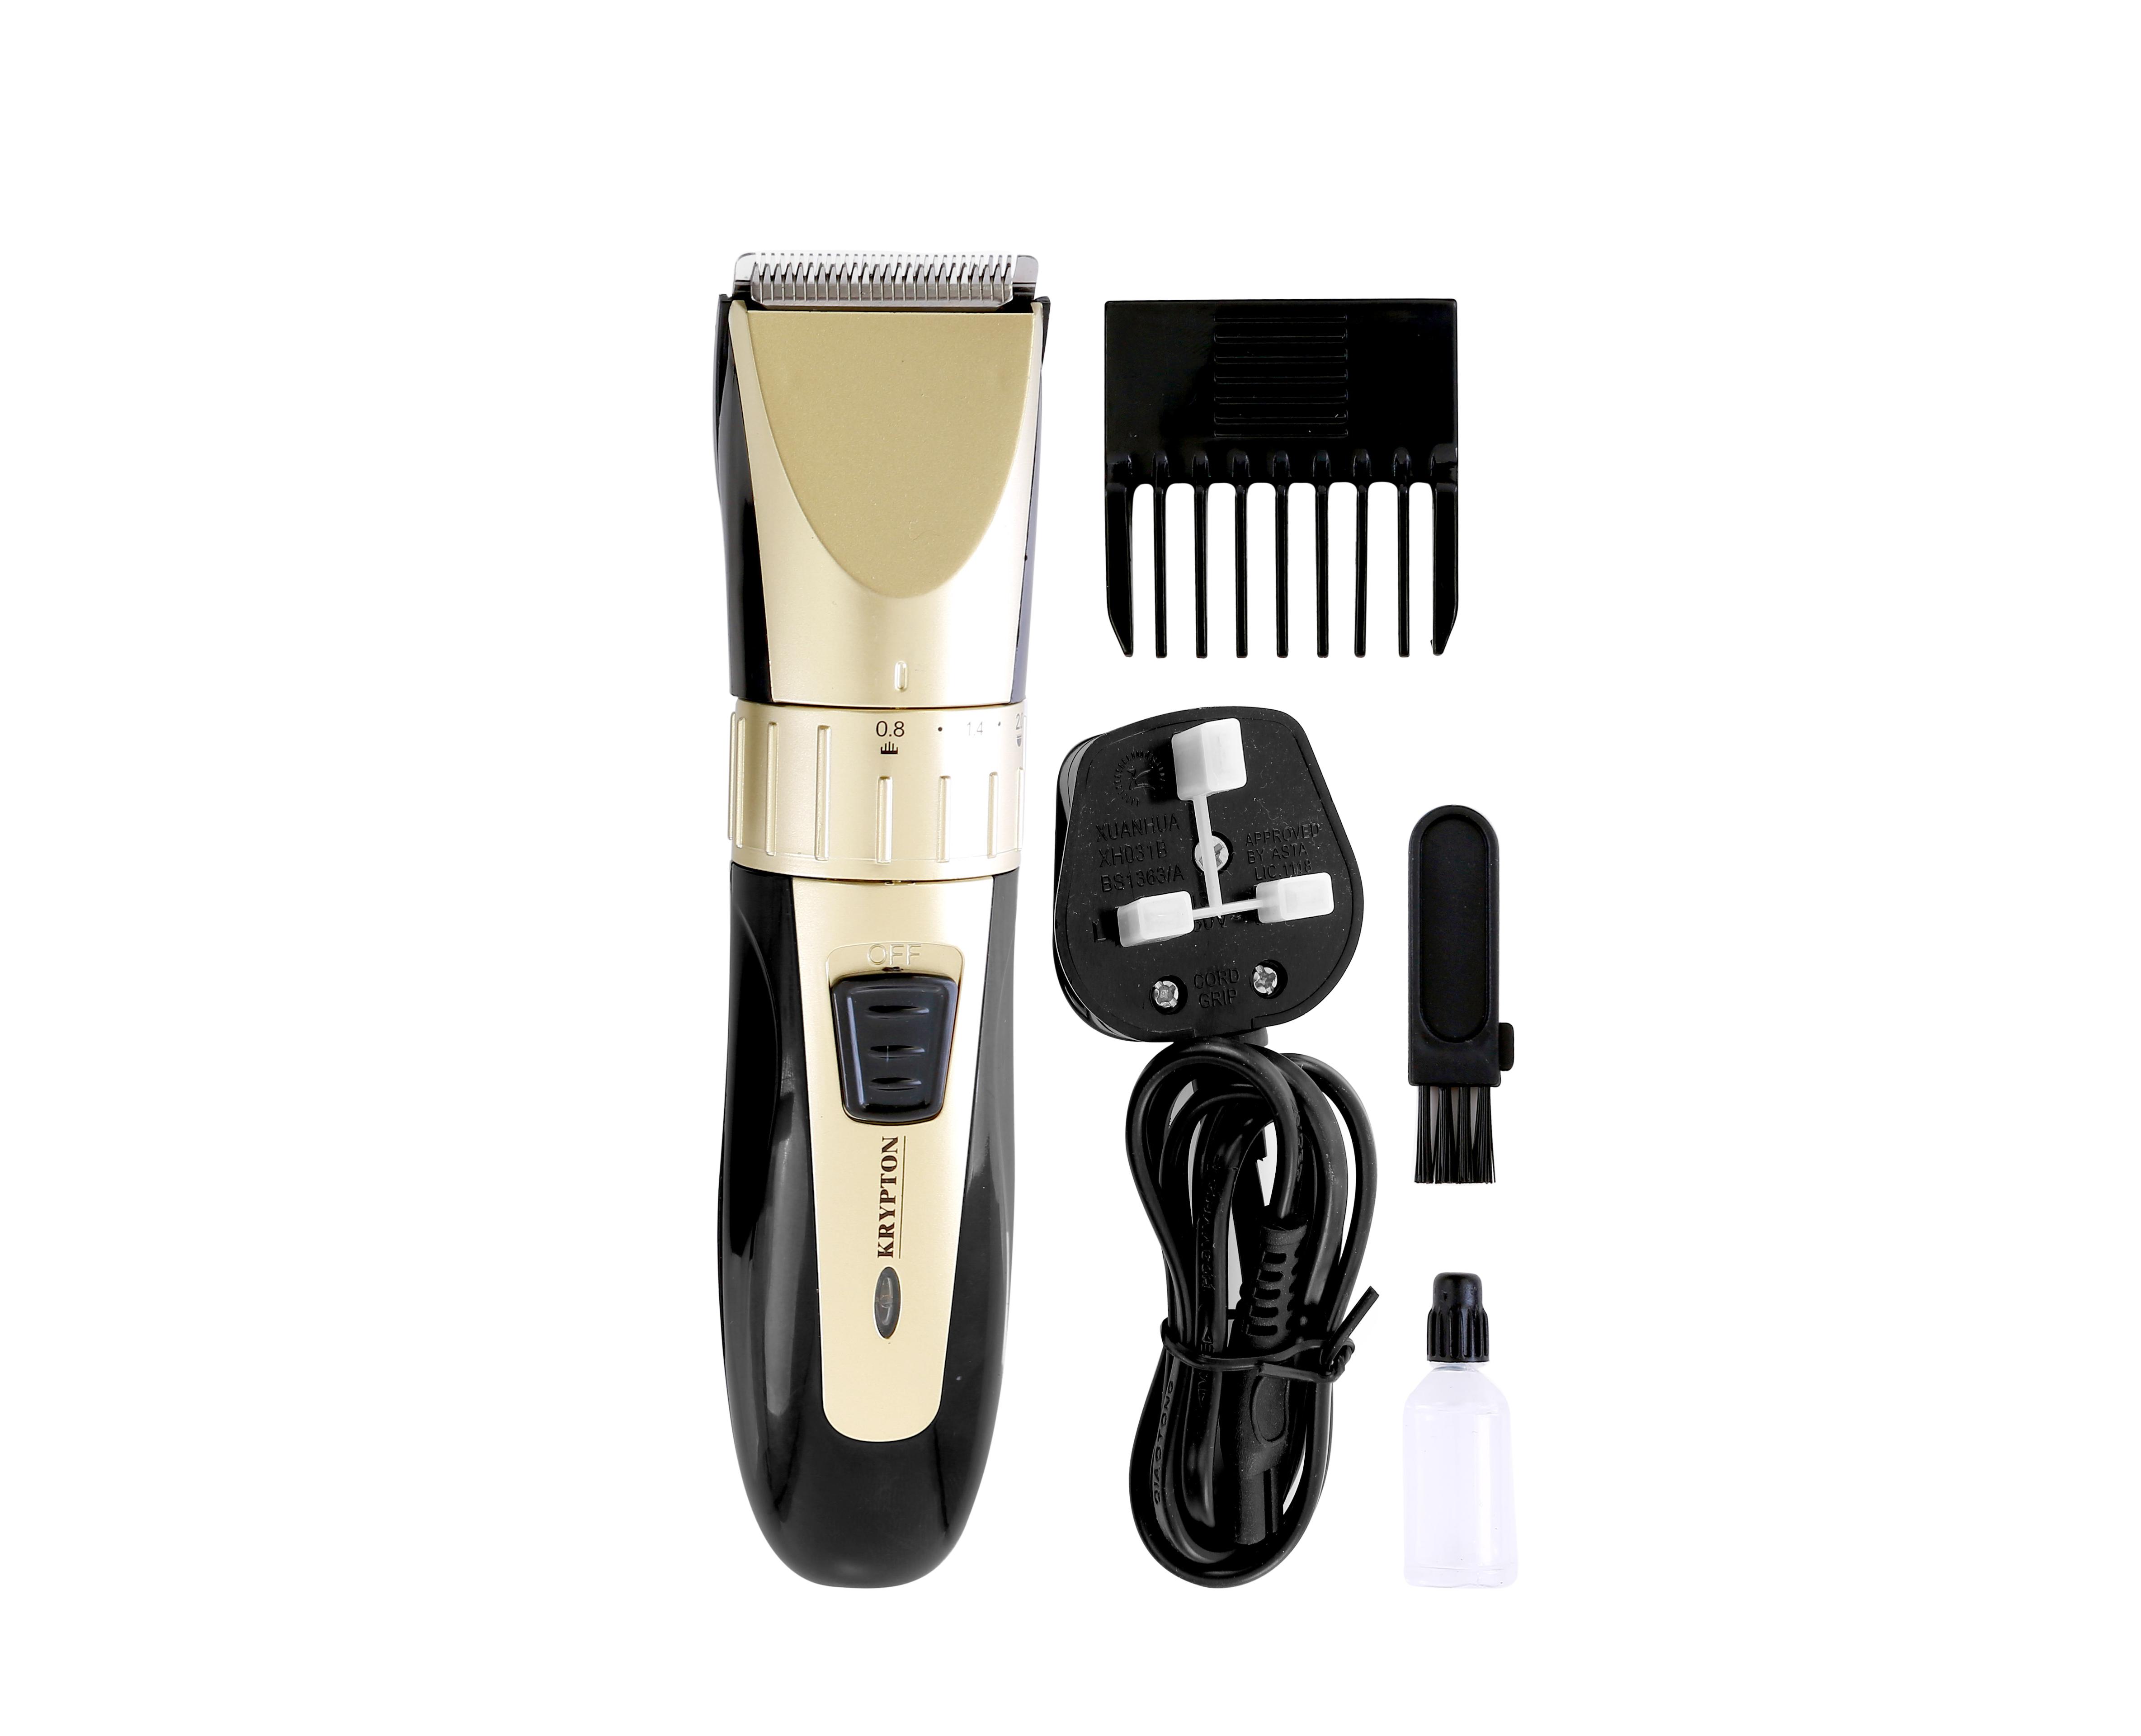 Rechargeable Hair Trimmer - Precise Beard Styler with Fine Steel Head | Indicator Lights, Cordless Trimmer, 45 Minutes Working in Single Charge